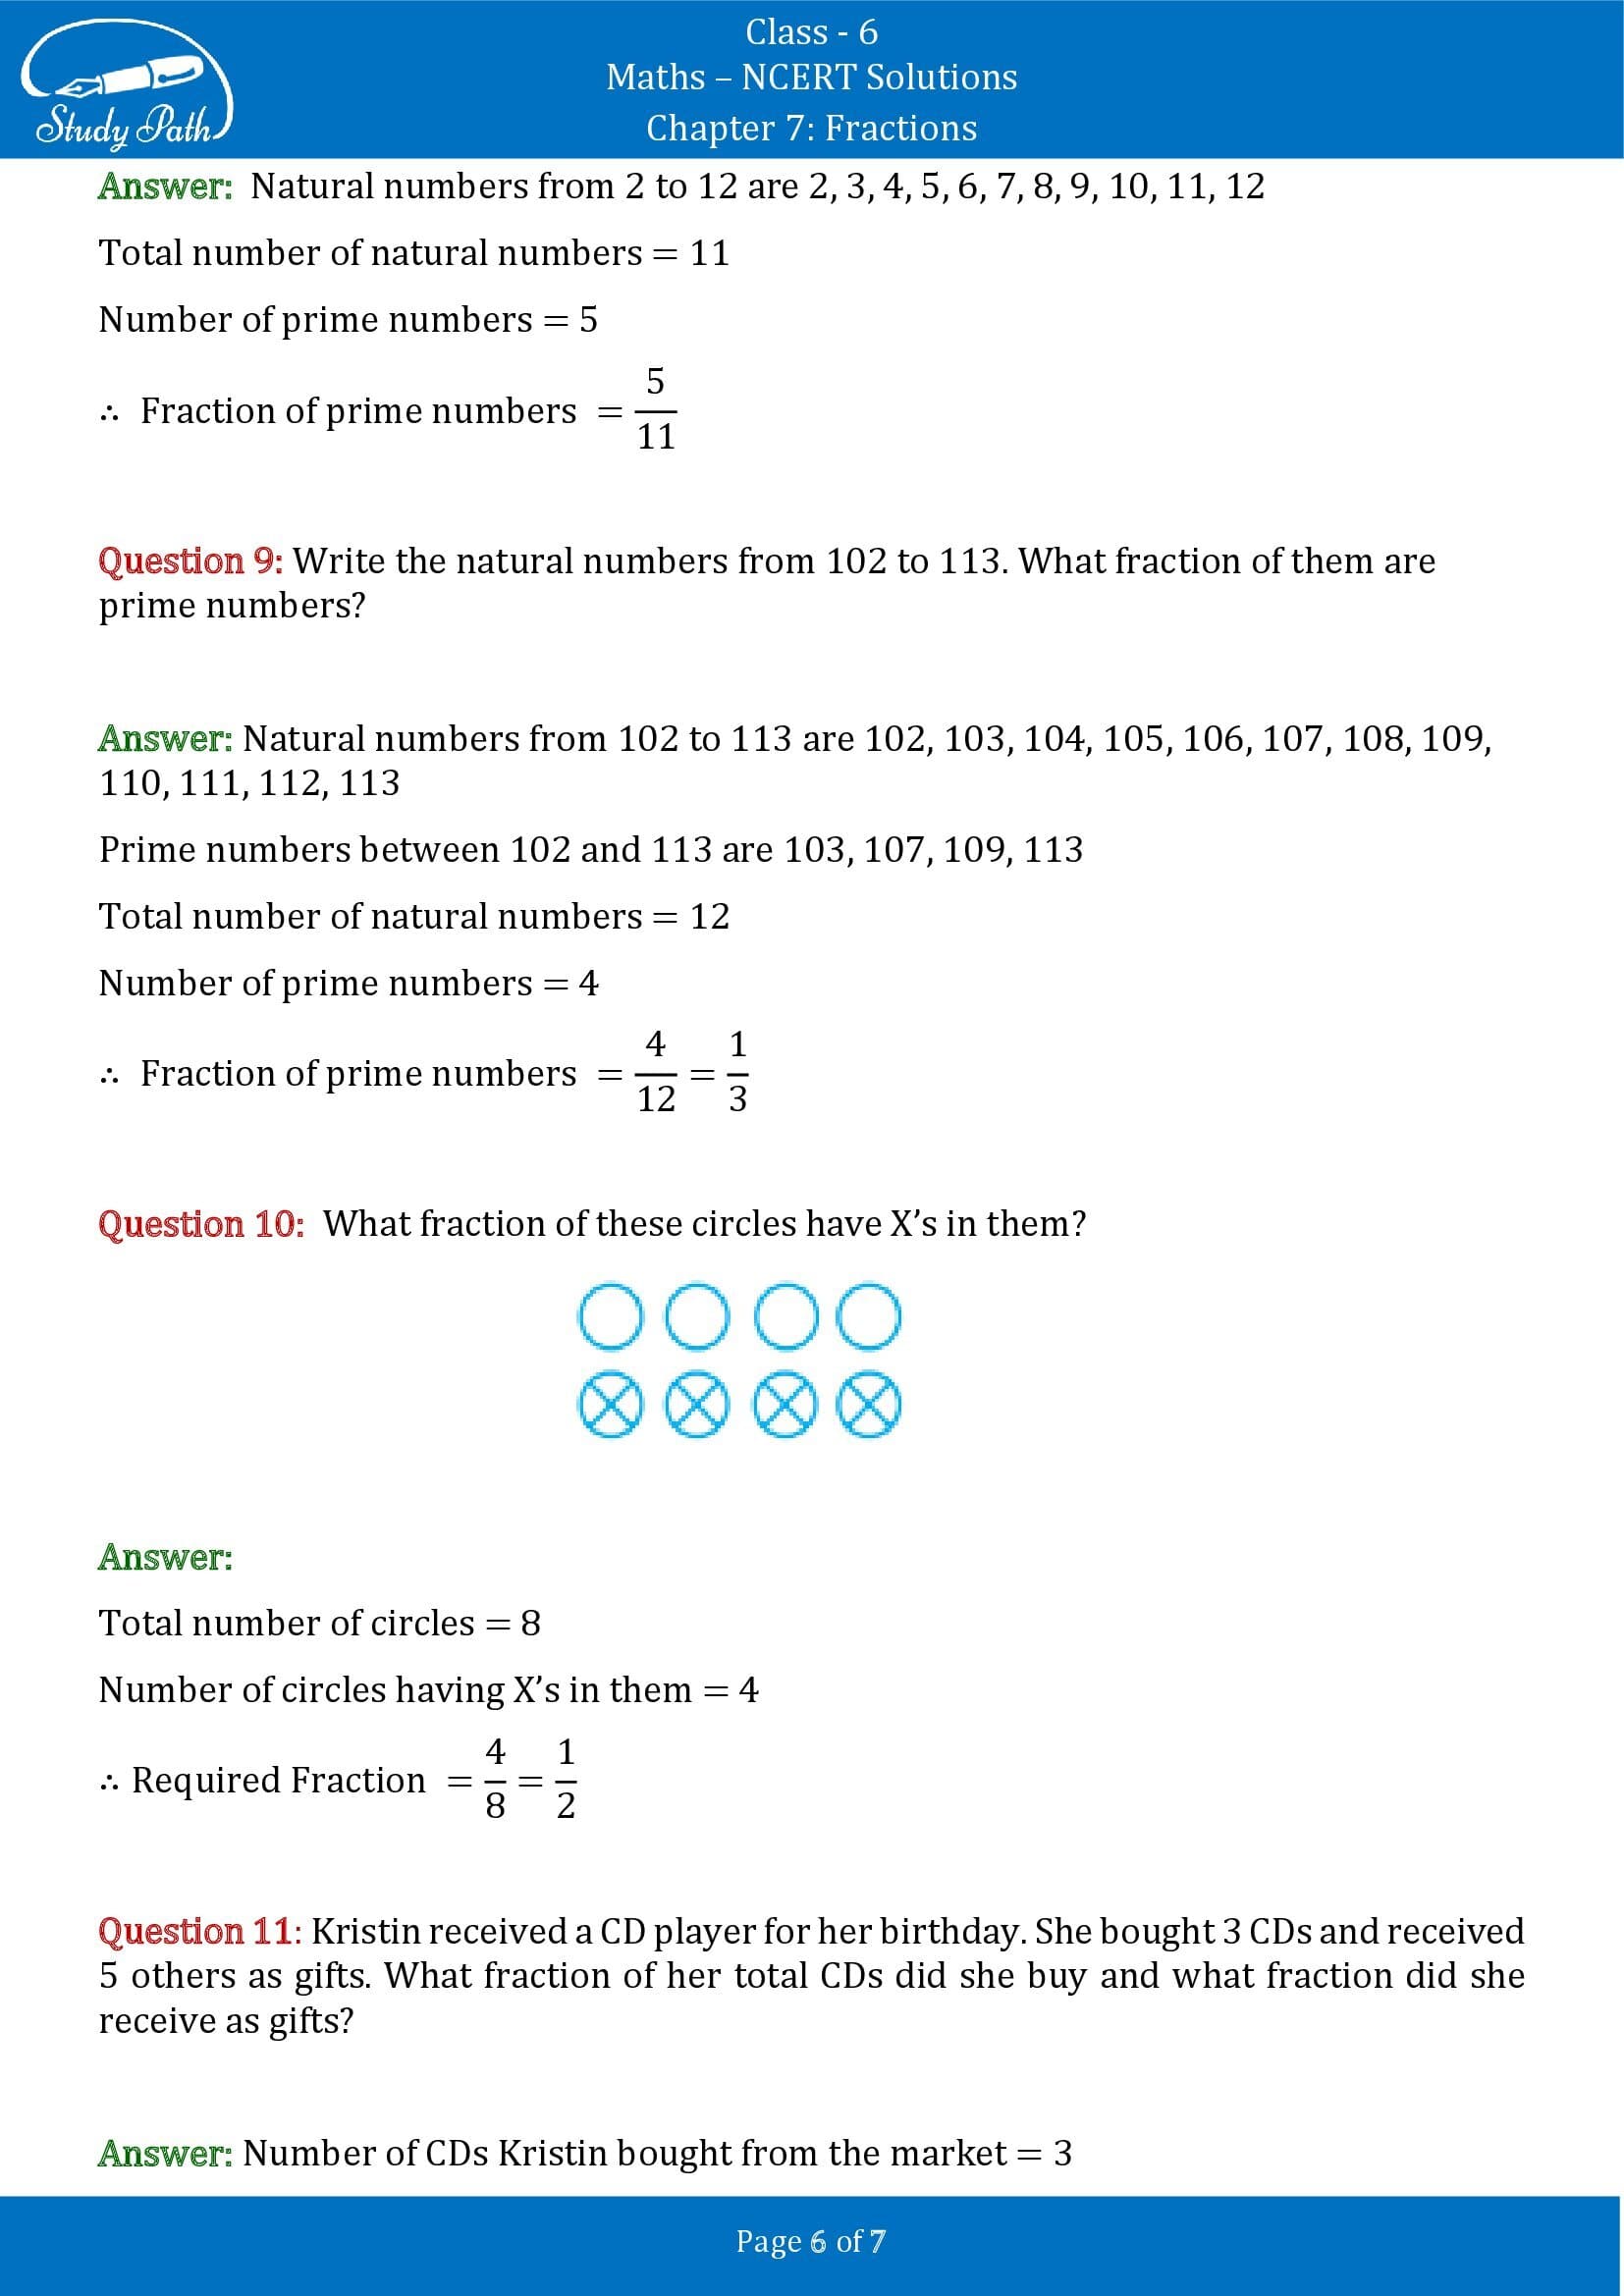 NCERT Solutions for Class 6 Maths Chapter 7 Fractions Exercise 7.1 00006